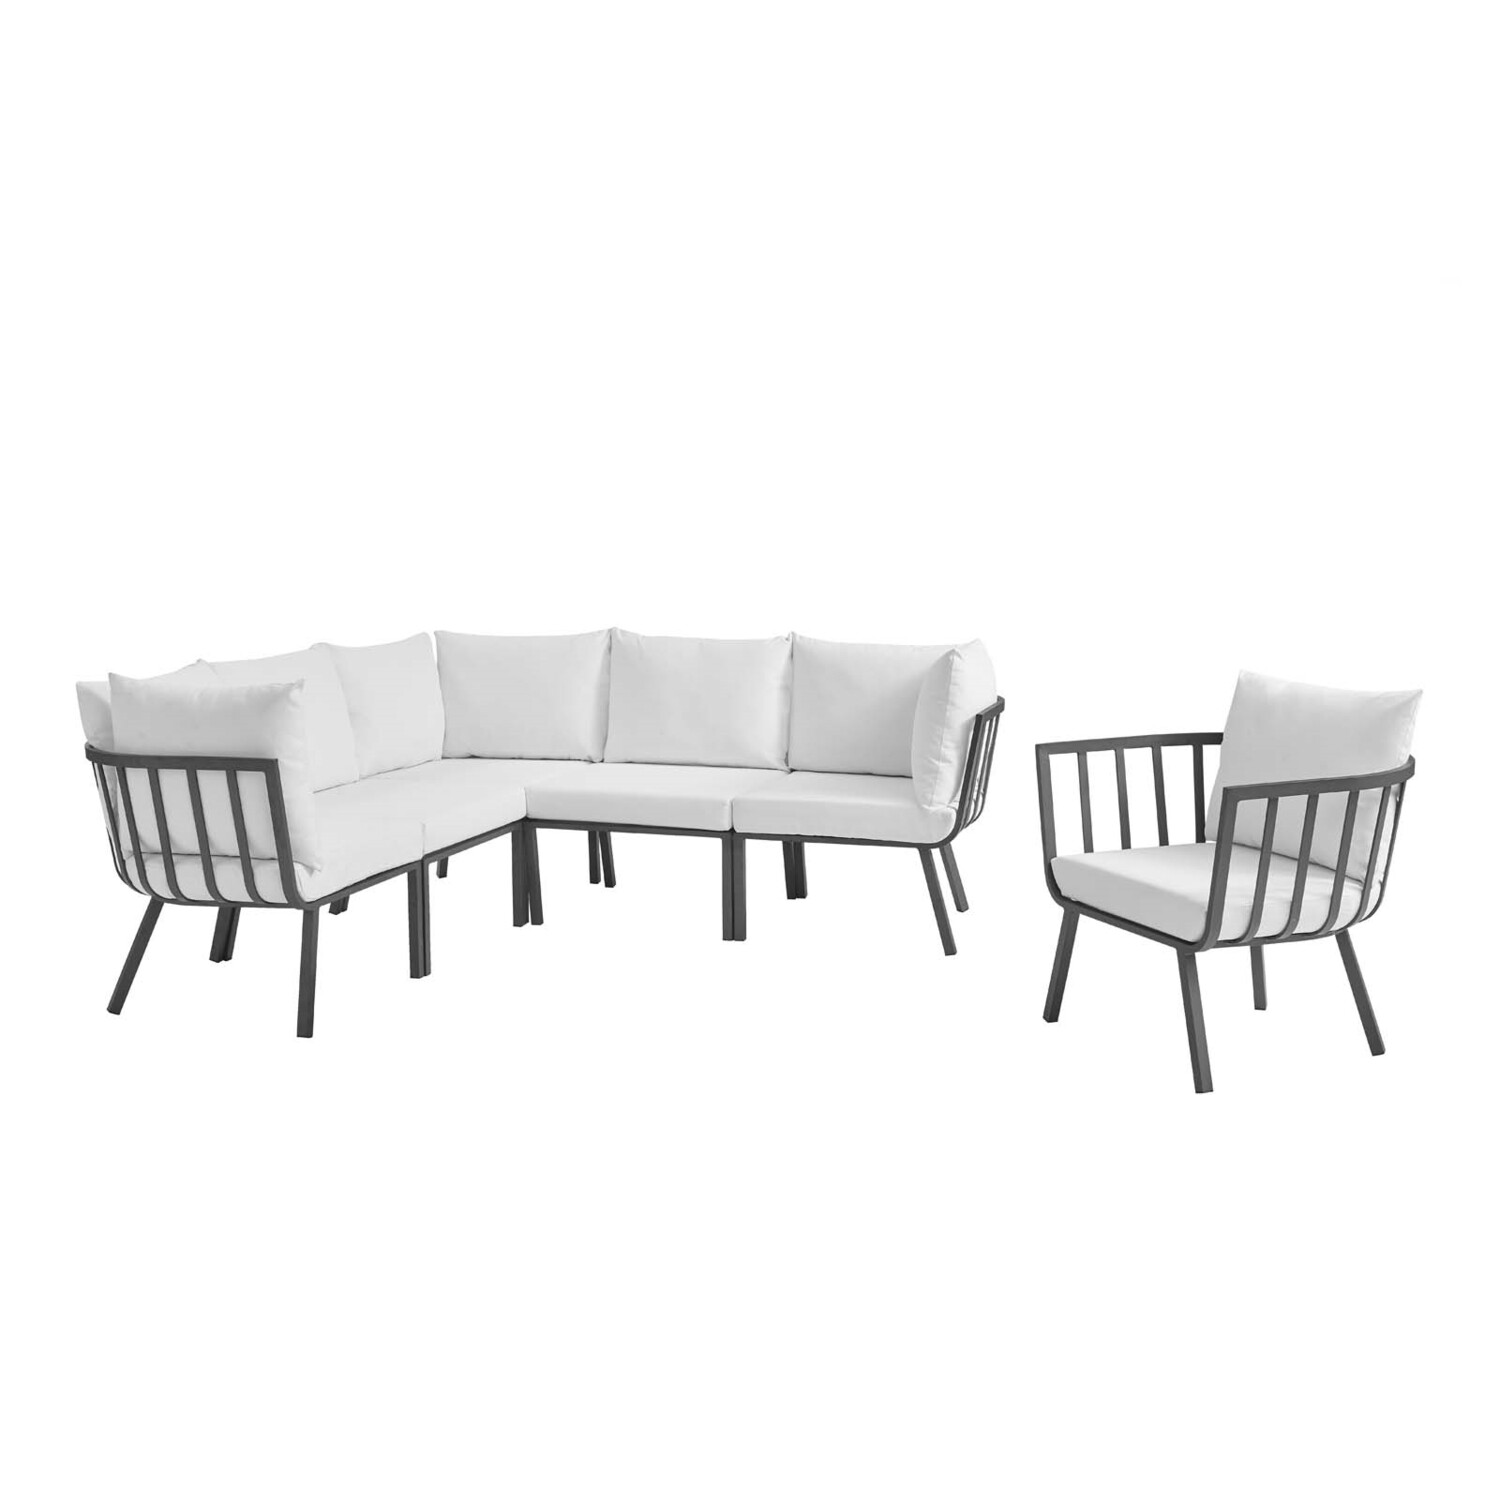 River North 6 Piece Outdoor Patio Sectional Set | Slate Frame